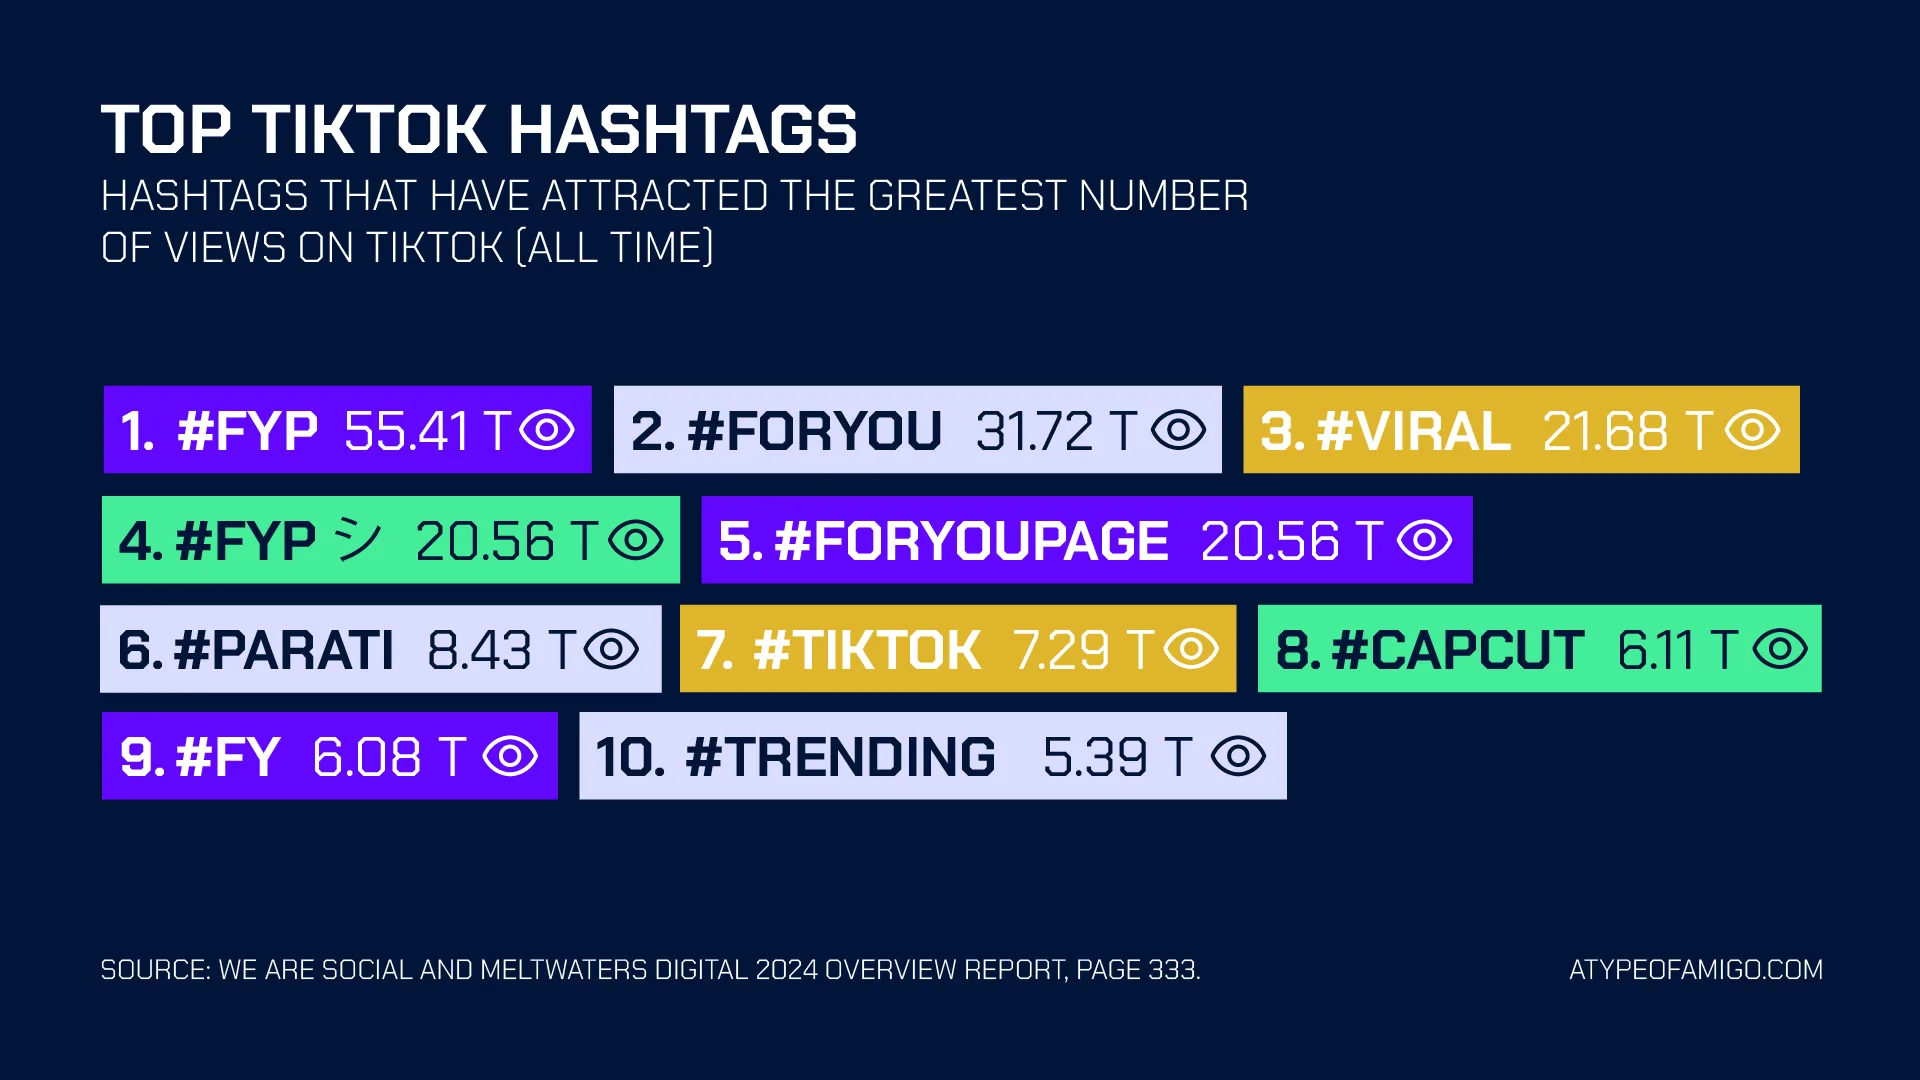 Hashtags that have attracted the greatest number of views on Tiktok (all time)